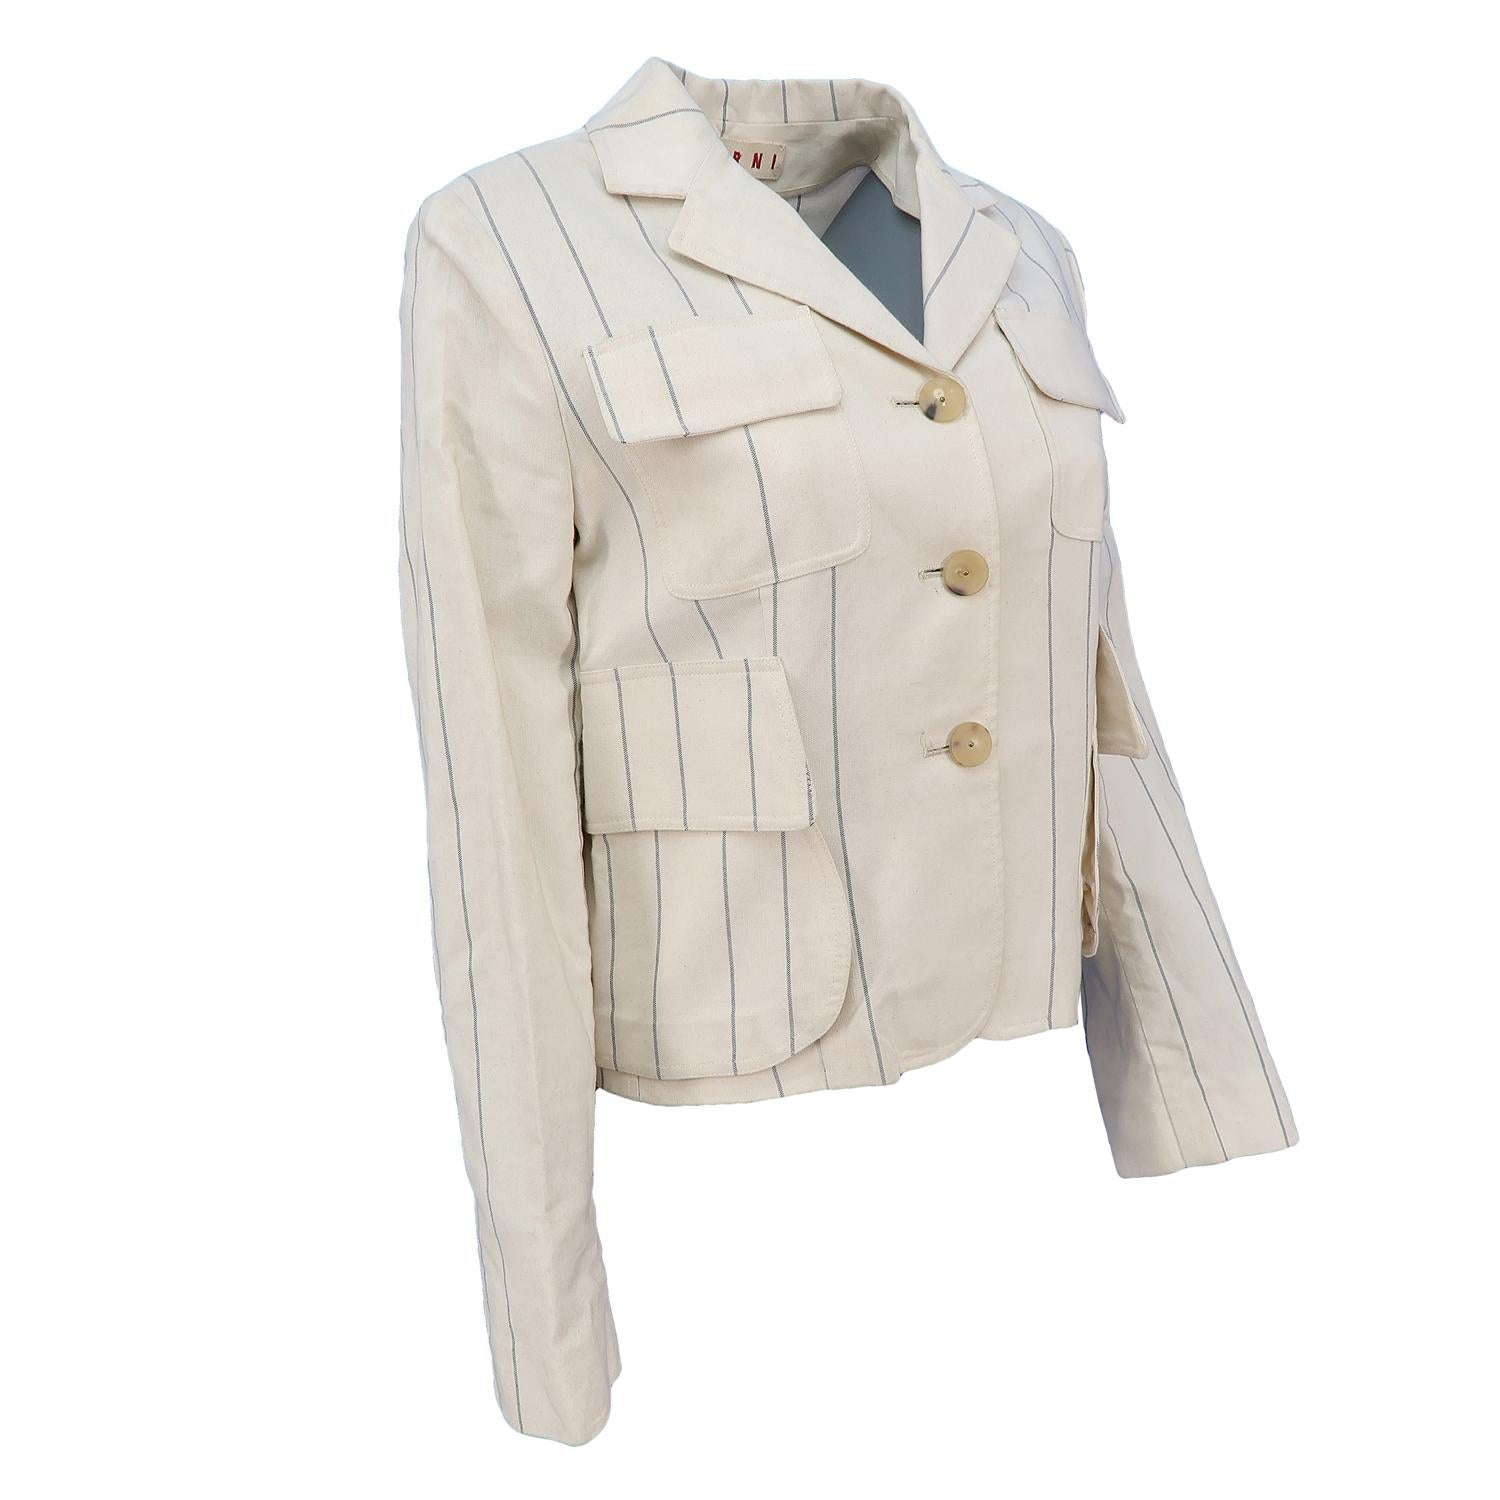 Consuelo Castiglioni’s take on tailoring was special and self-assured. This cute cropped blazer -made out of crispy cotton- features stylized front pockets, which add feminine appeal to a menswear-inspired staple. The subtle stripe motif within the